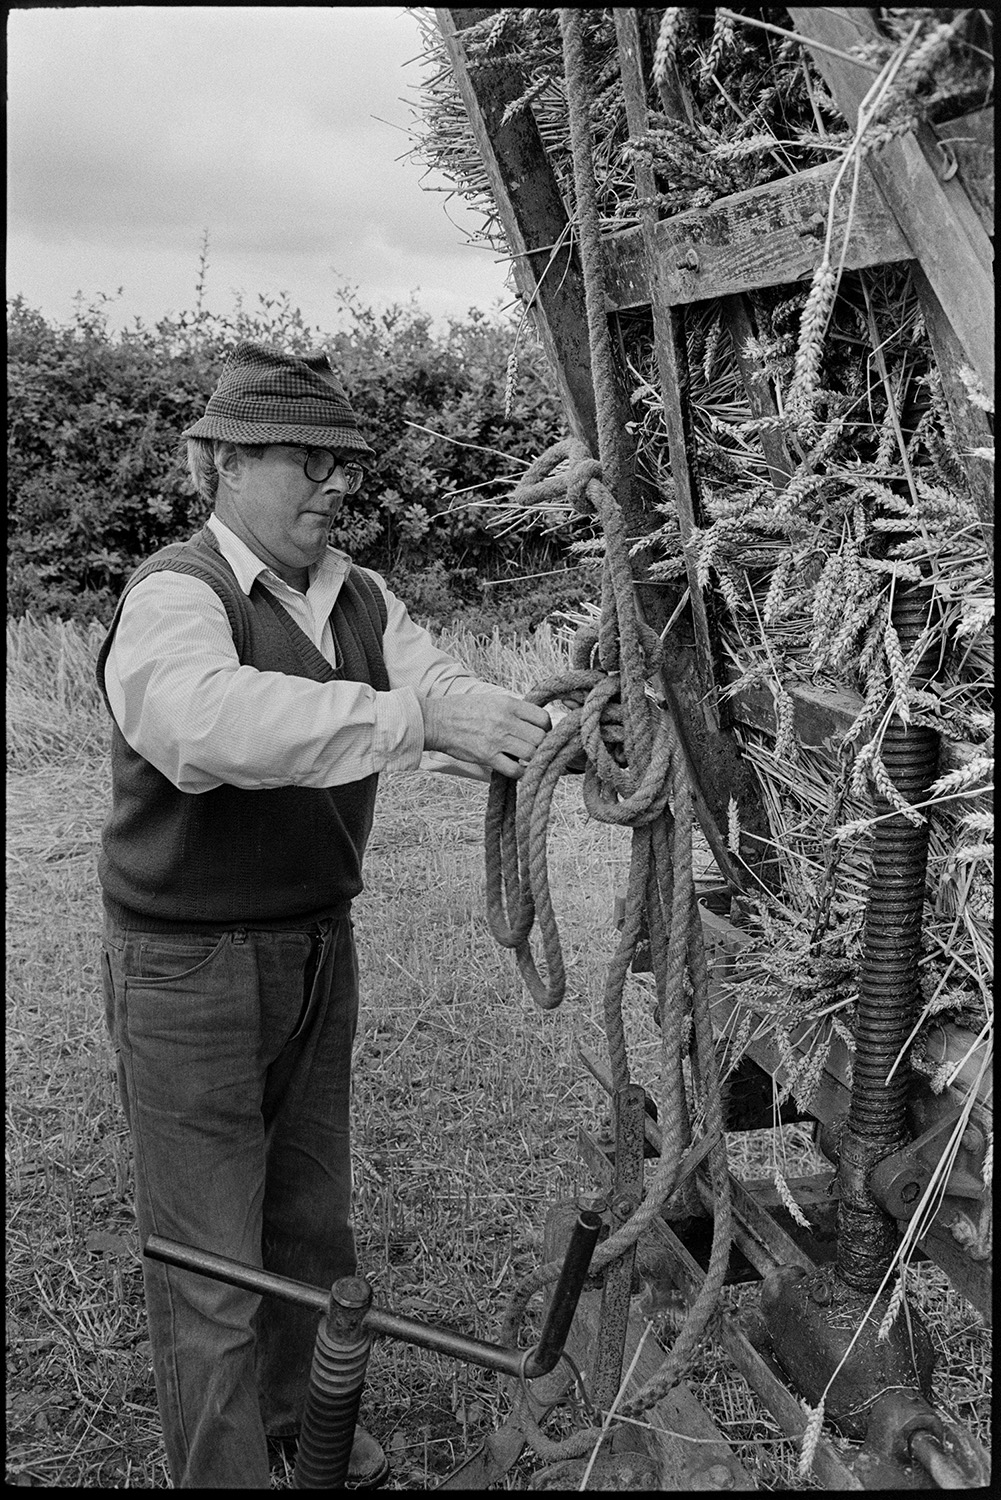 Farmers making wheatrick from stooks, loading trailer. 
[A man tying rope around a trailer to secure sheaves of wheat, in a field at Westacott, Riddlecombe. The wheat is being taken to build a wheat rick in another field.]